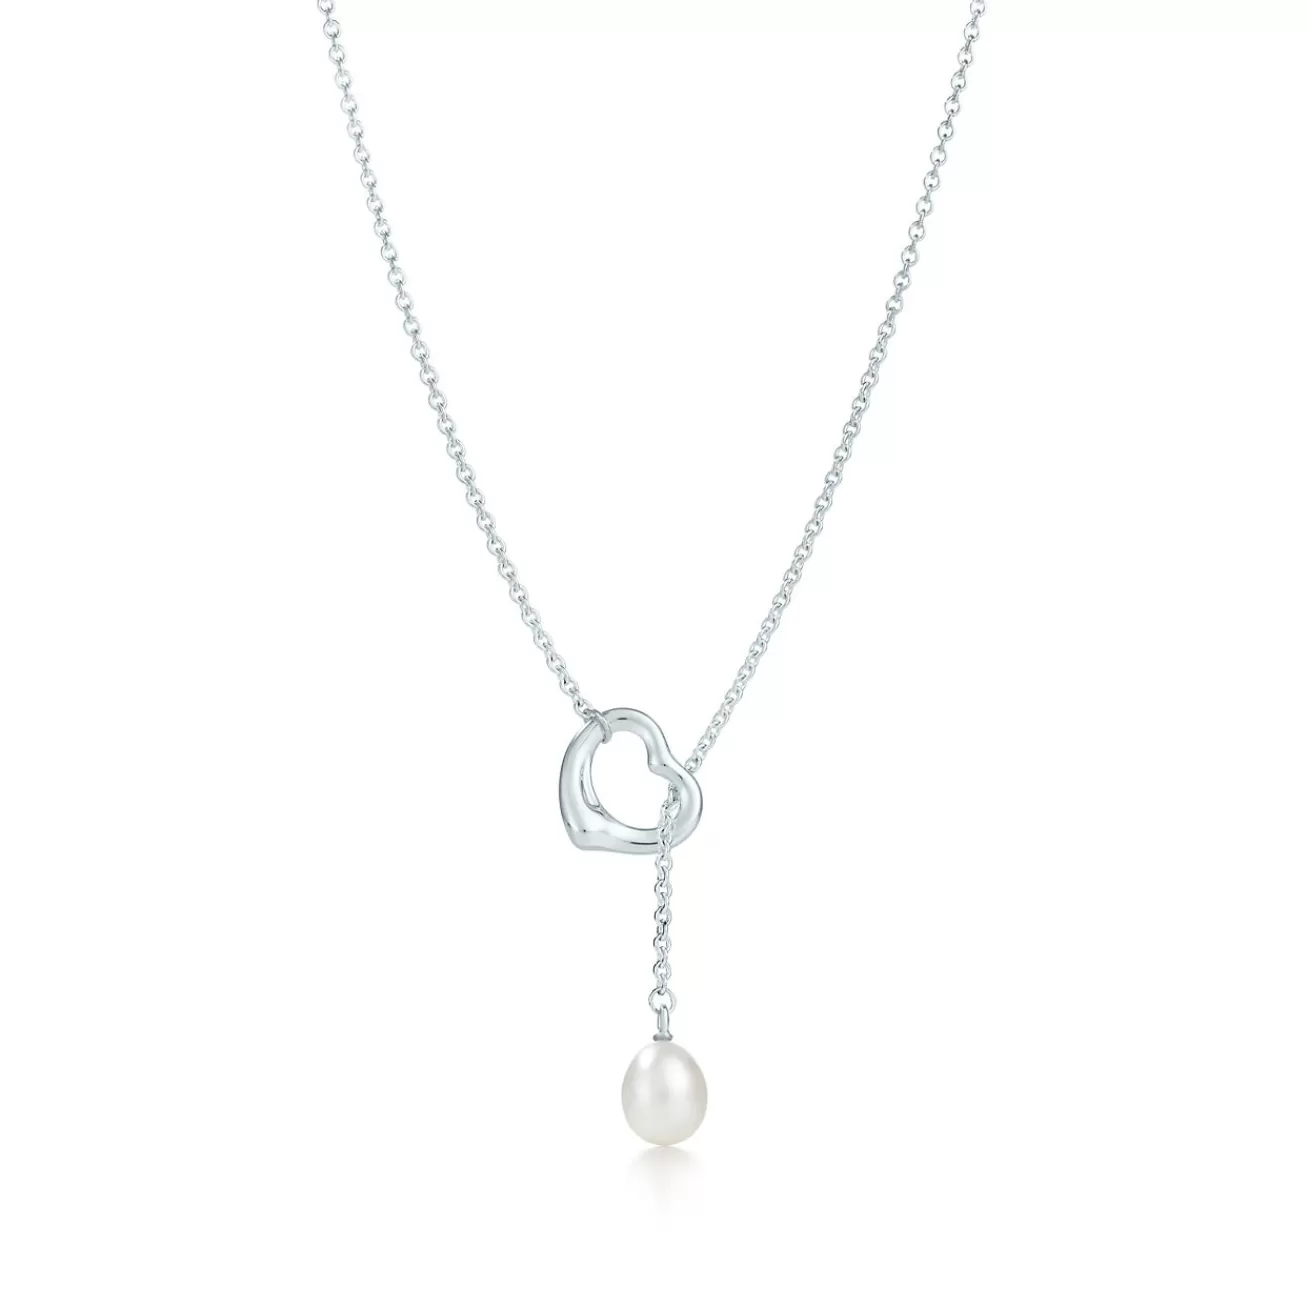 Tiffany & Co. Elsa Peretti® Open Heart Lariat Necklace in Silver with Pearls, 9-9.5 mm | ^ Necklaces & Pendants | Gifts for Her